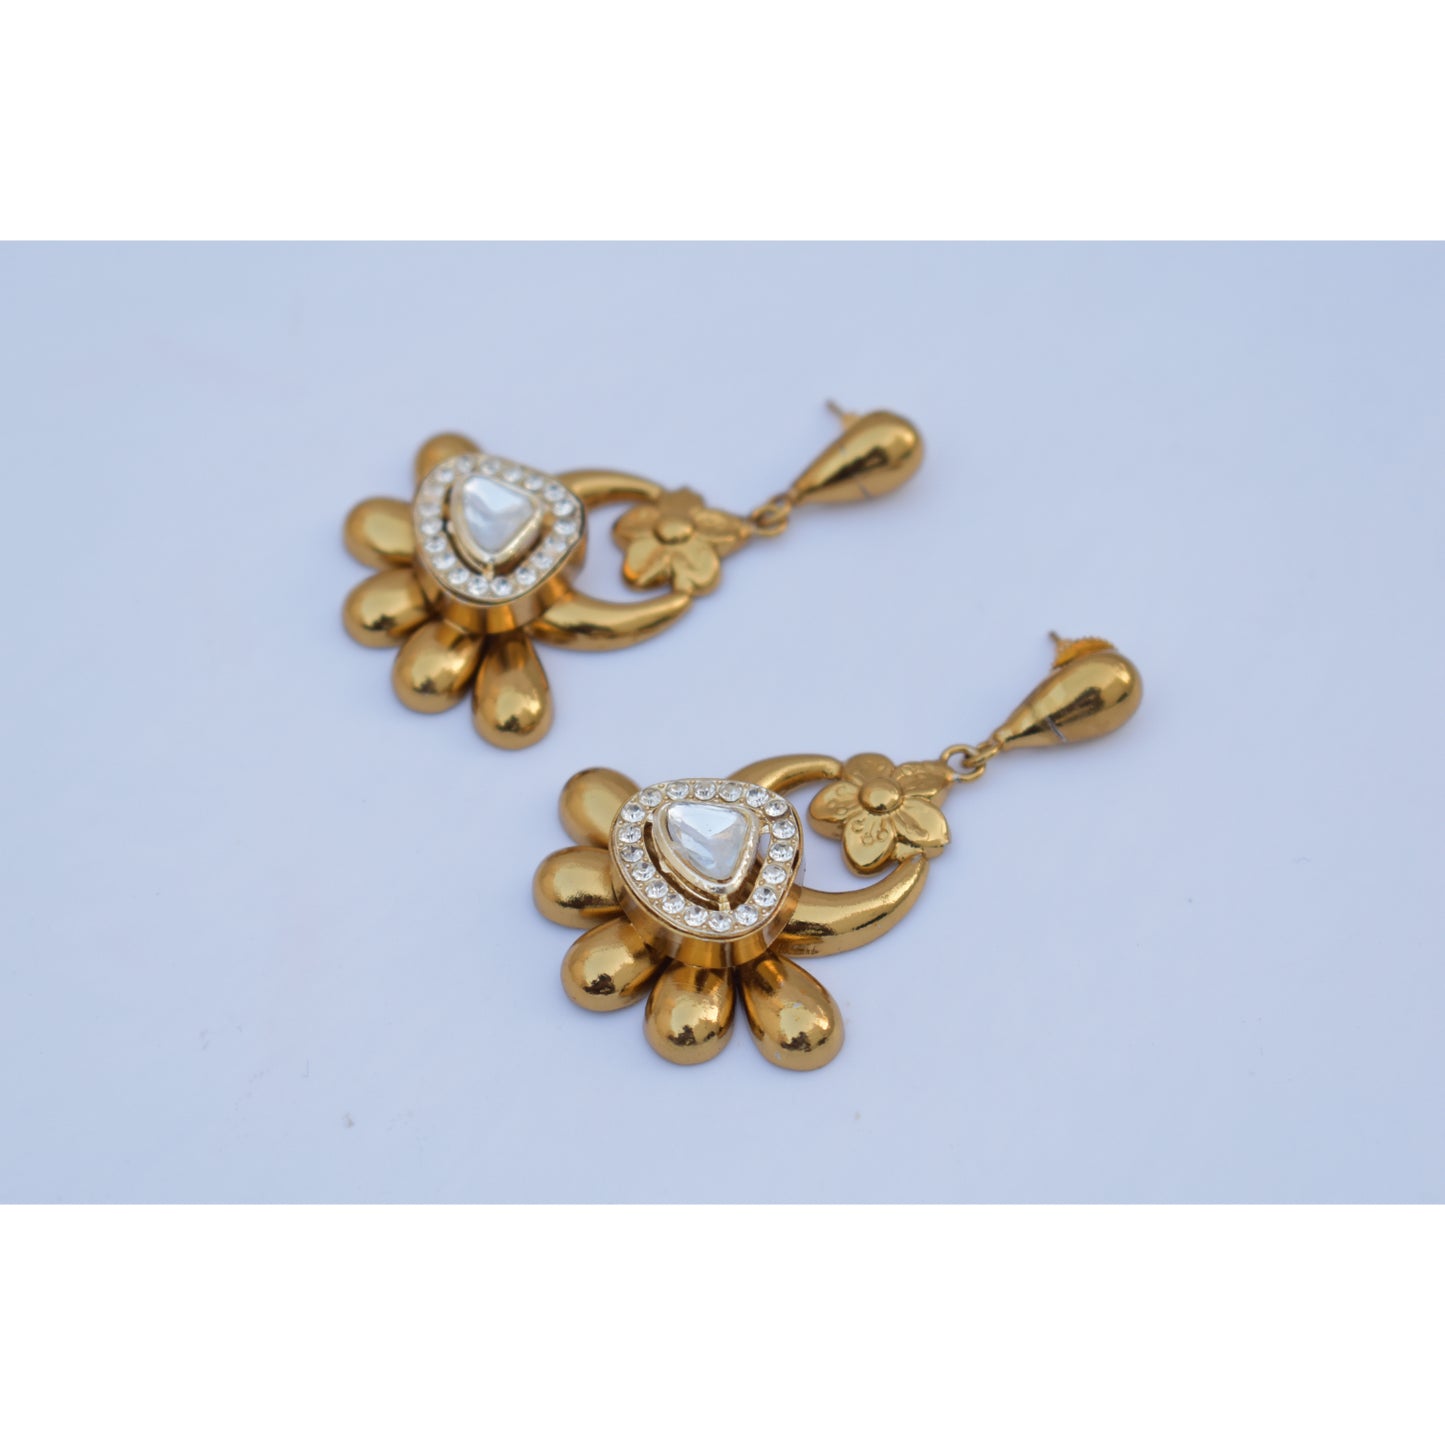 Antique goldplated earing for women and girls